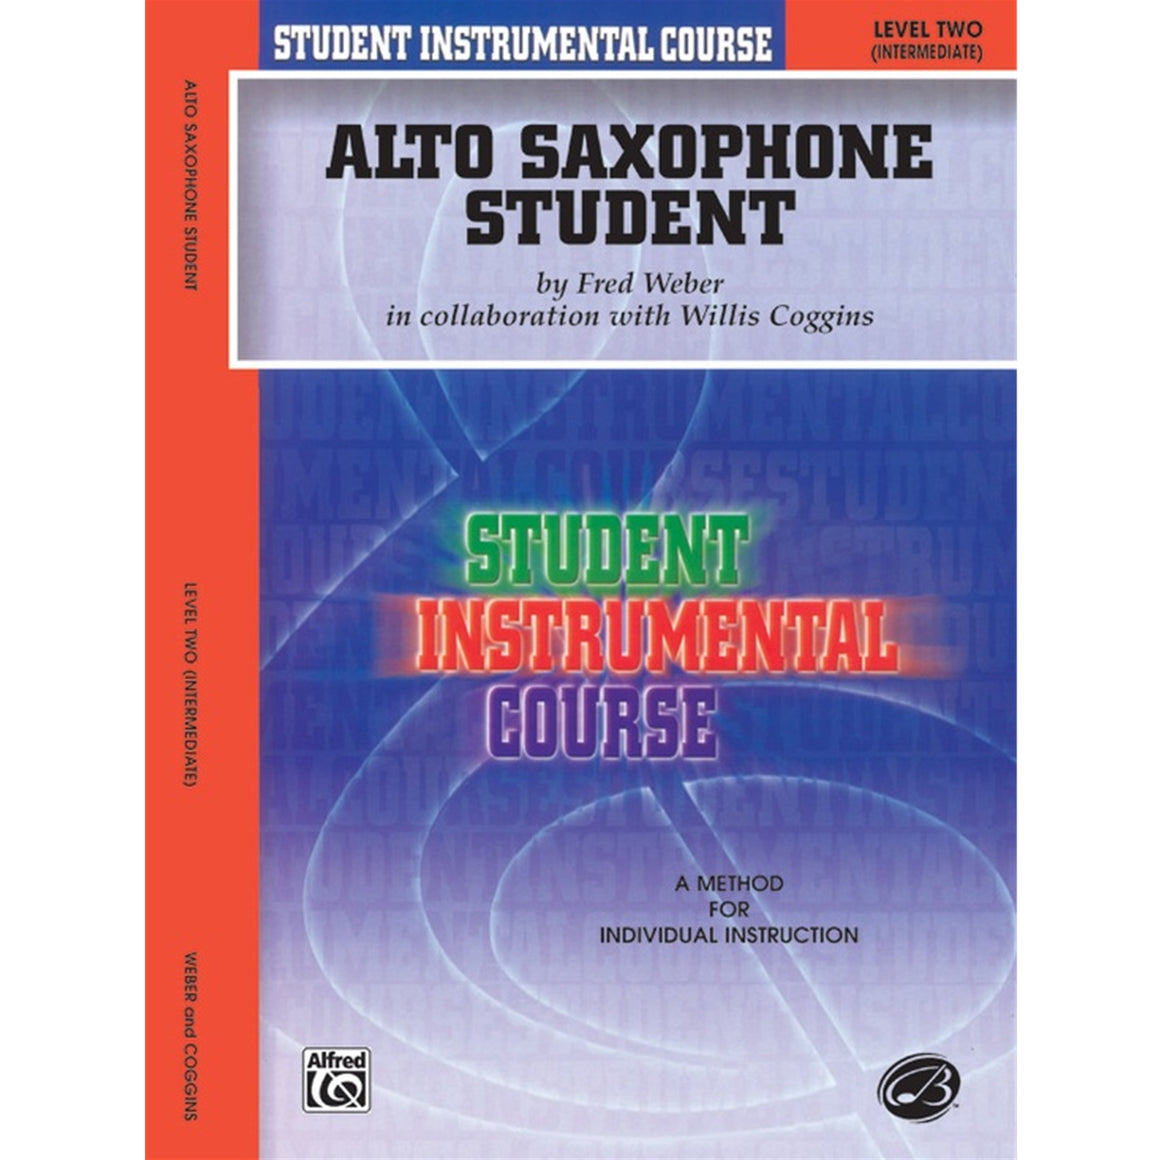 ALFRED BIC00231A Student Instrumental Course: Alto Saxophone Student, Level II [Saxophone]